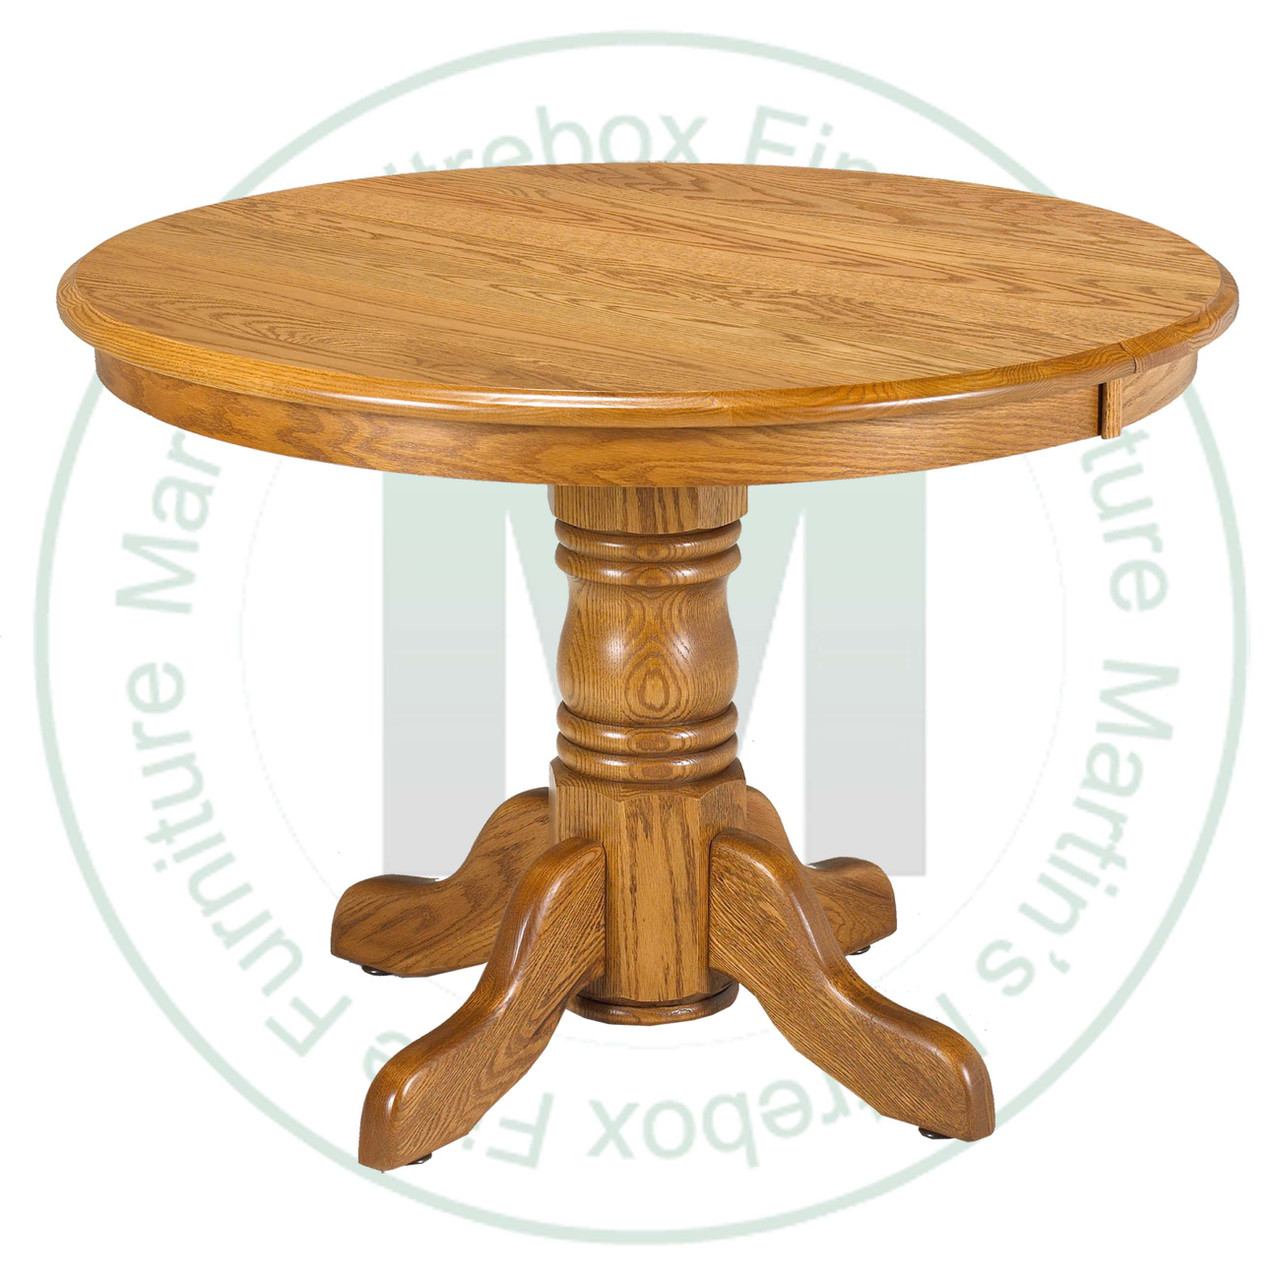 Maple Lancaster Collection Single Pedestal Table 42''D x 48''W x 30''H  Round Solid Table. Table Has 1'' Thick Top